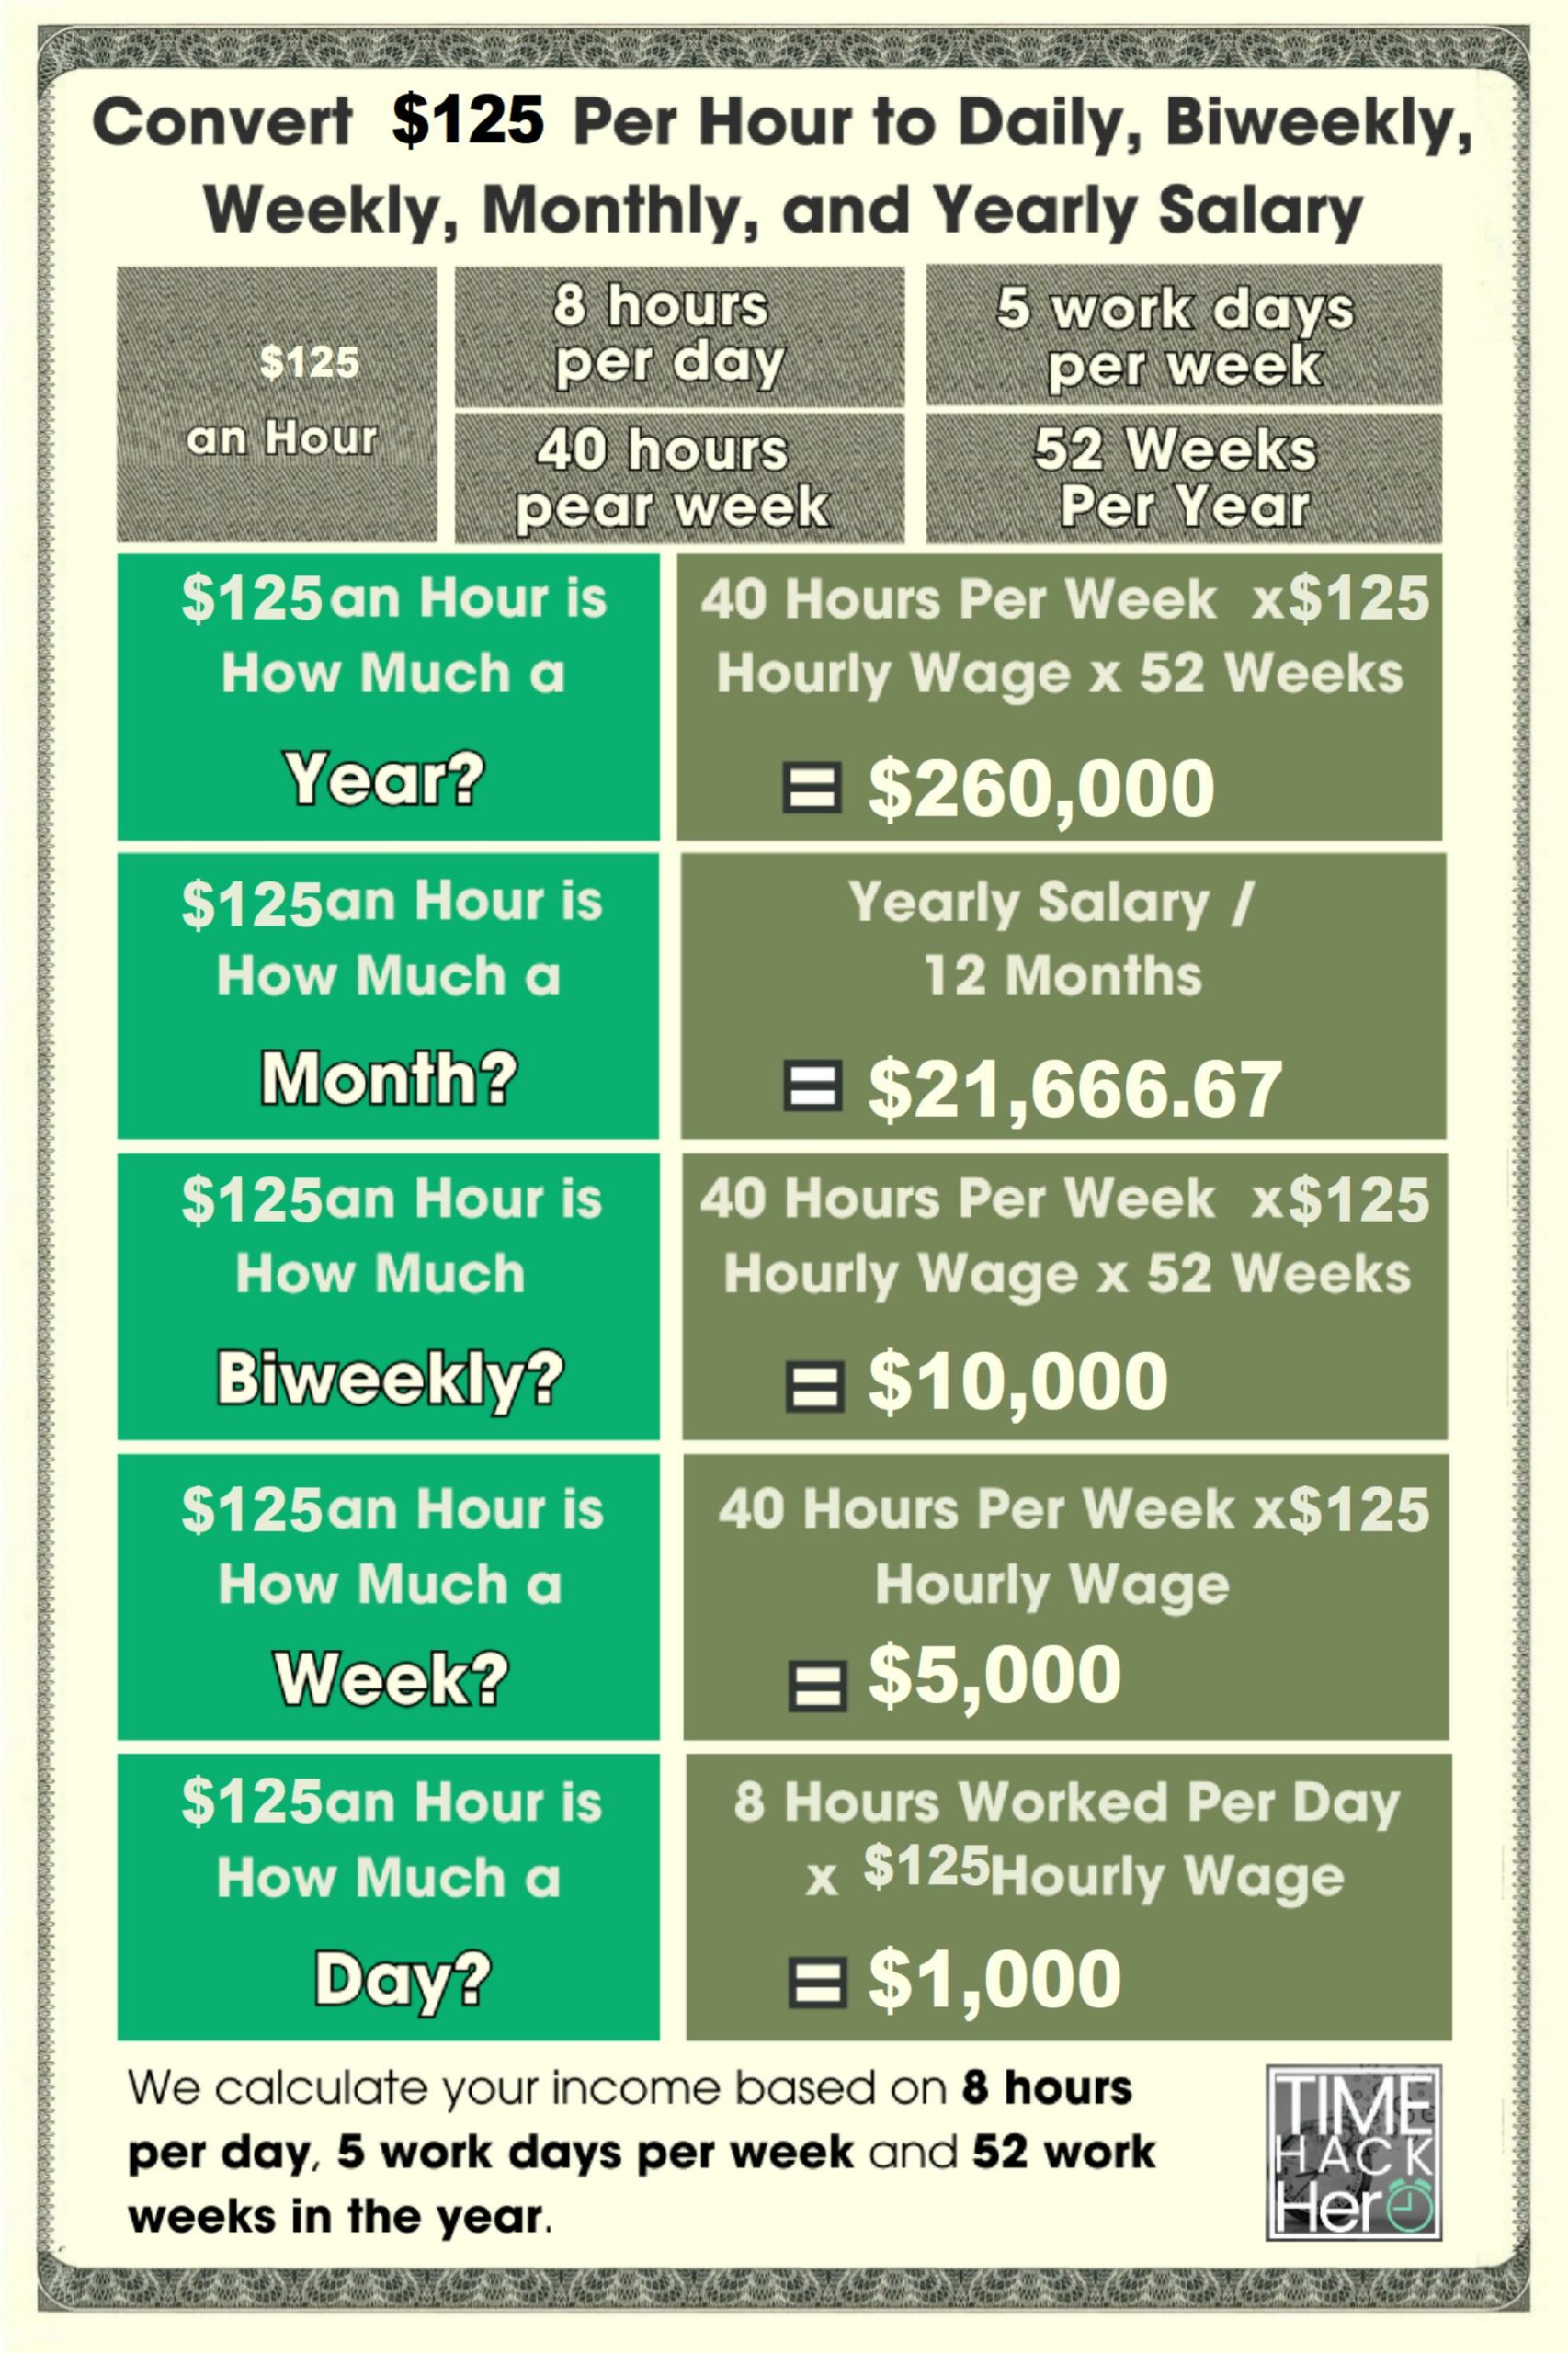 Convert $125 Per Hour to Weekly, Monthly, and Yearly Salary